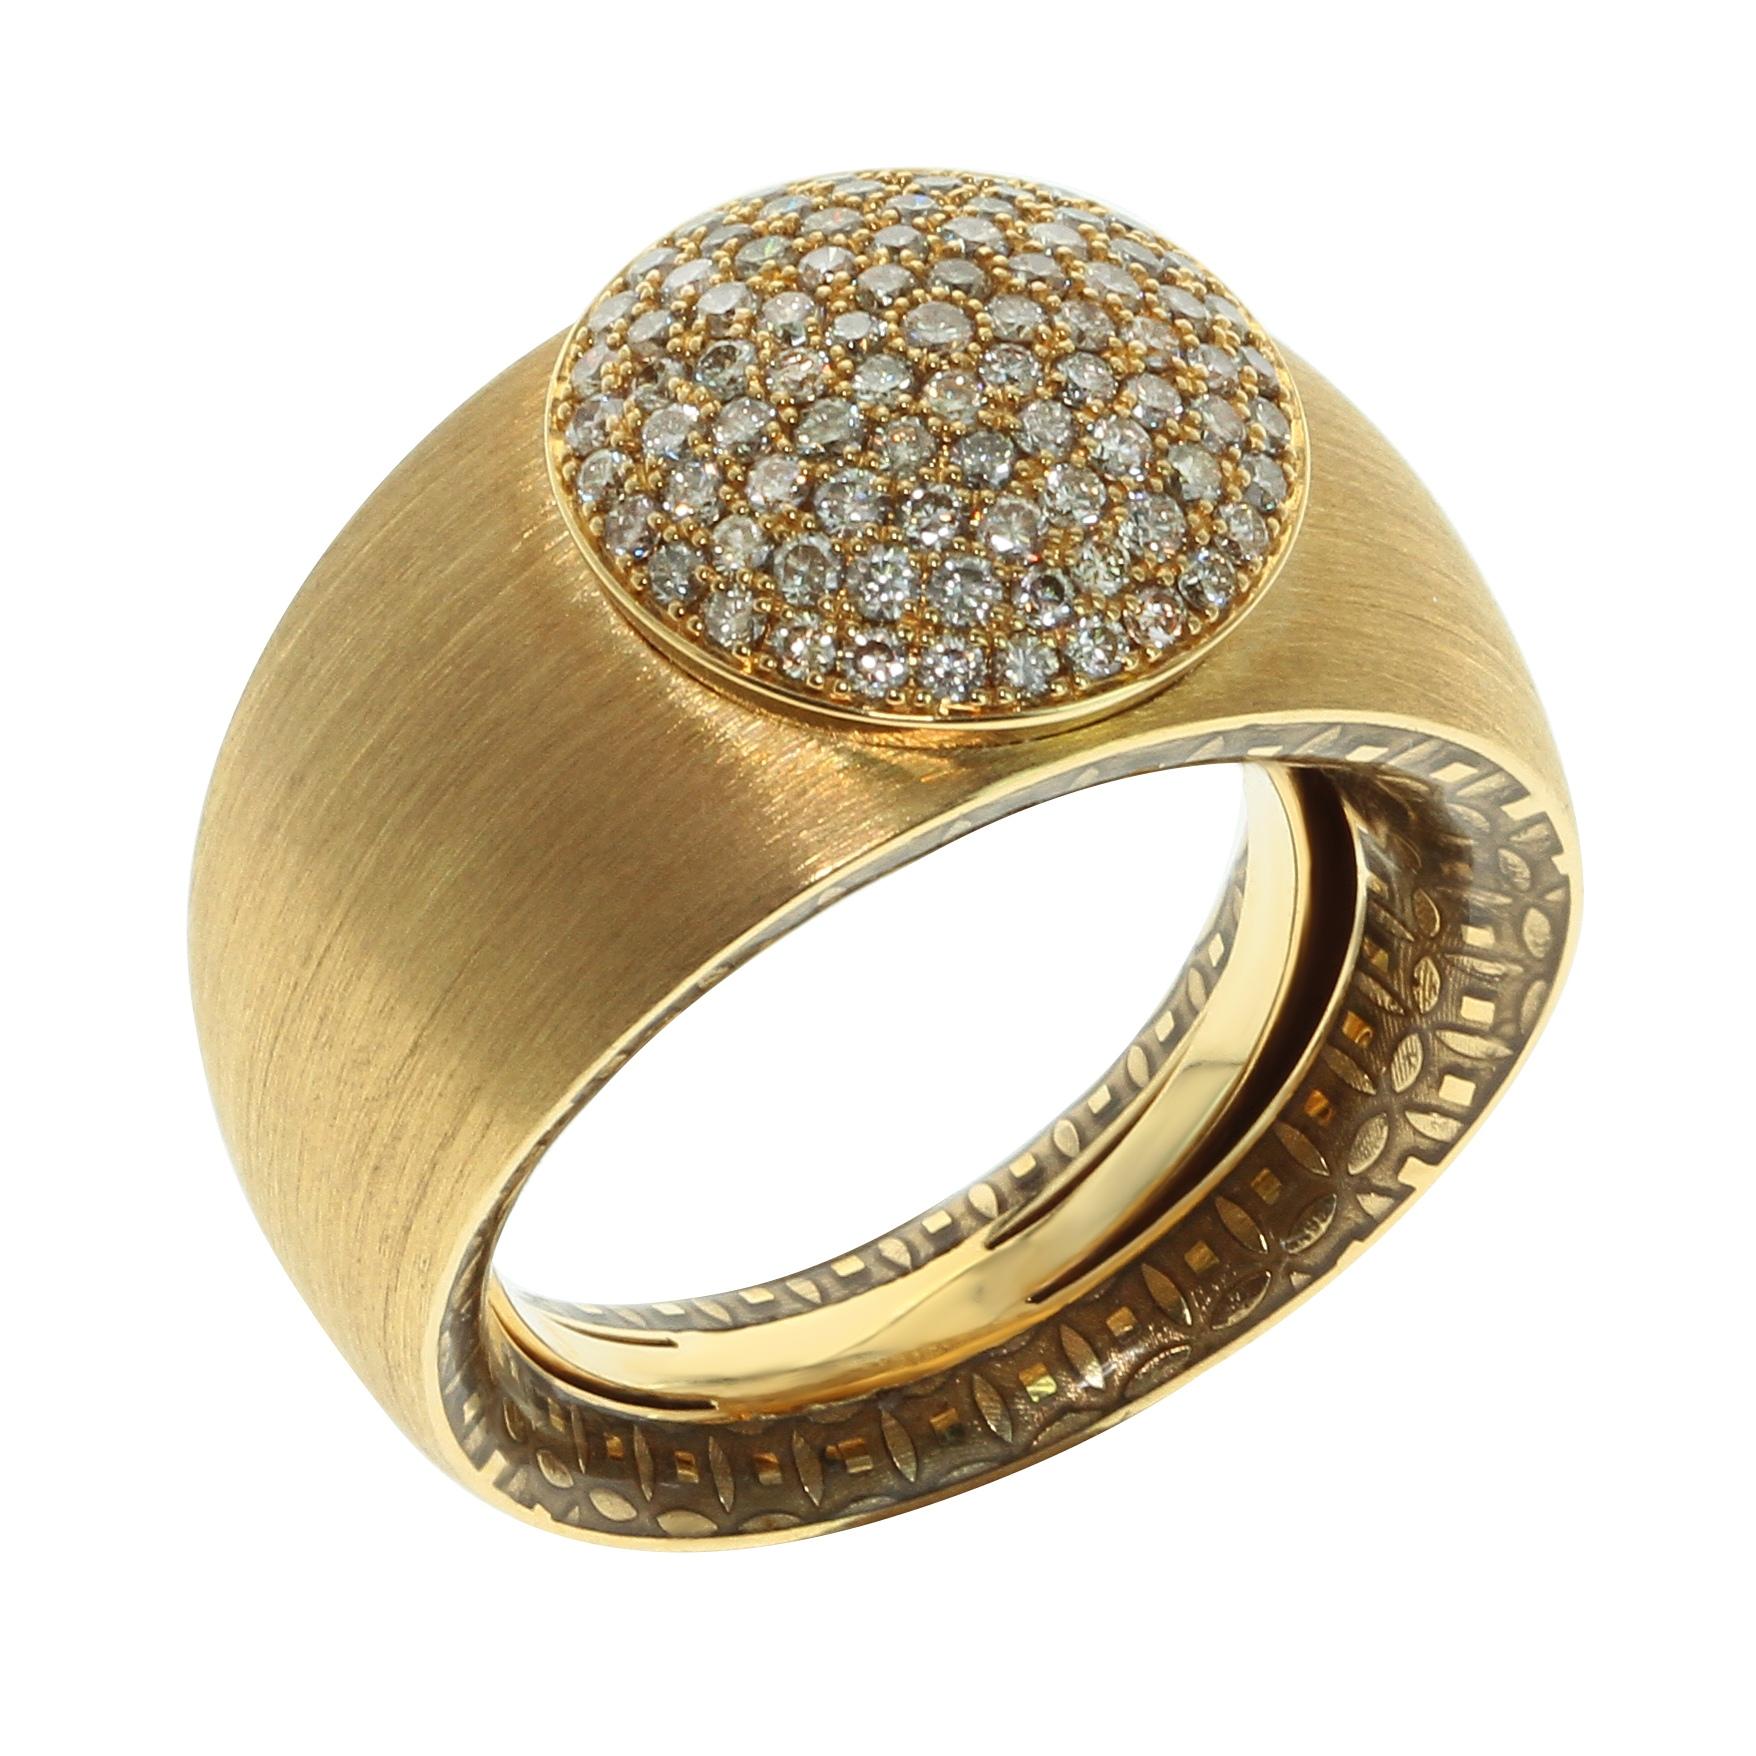 Diamonds Colored Enamel 18 Karat Yellow Gold Kaleidoscope Ring
Please take a look at one of our trademark textures in Kaleidoscope Collection - 